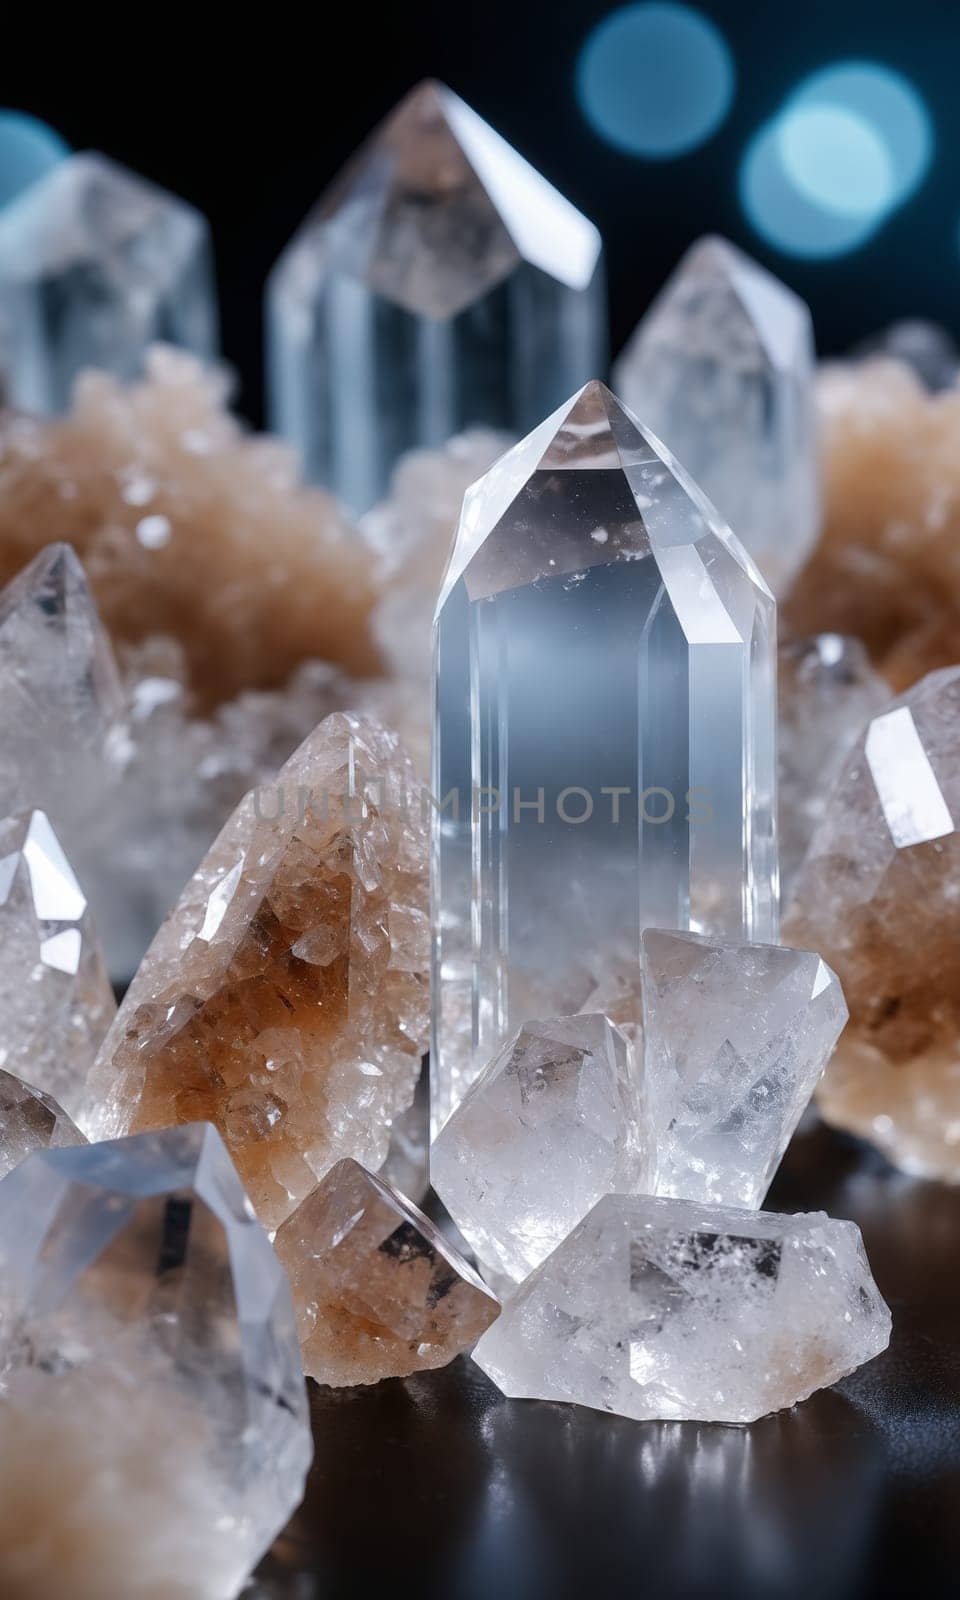 Crystals of crystal quartz on a black background close-up. by Andre1ns